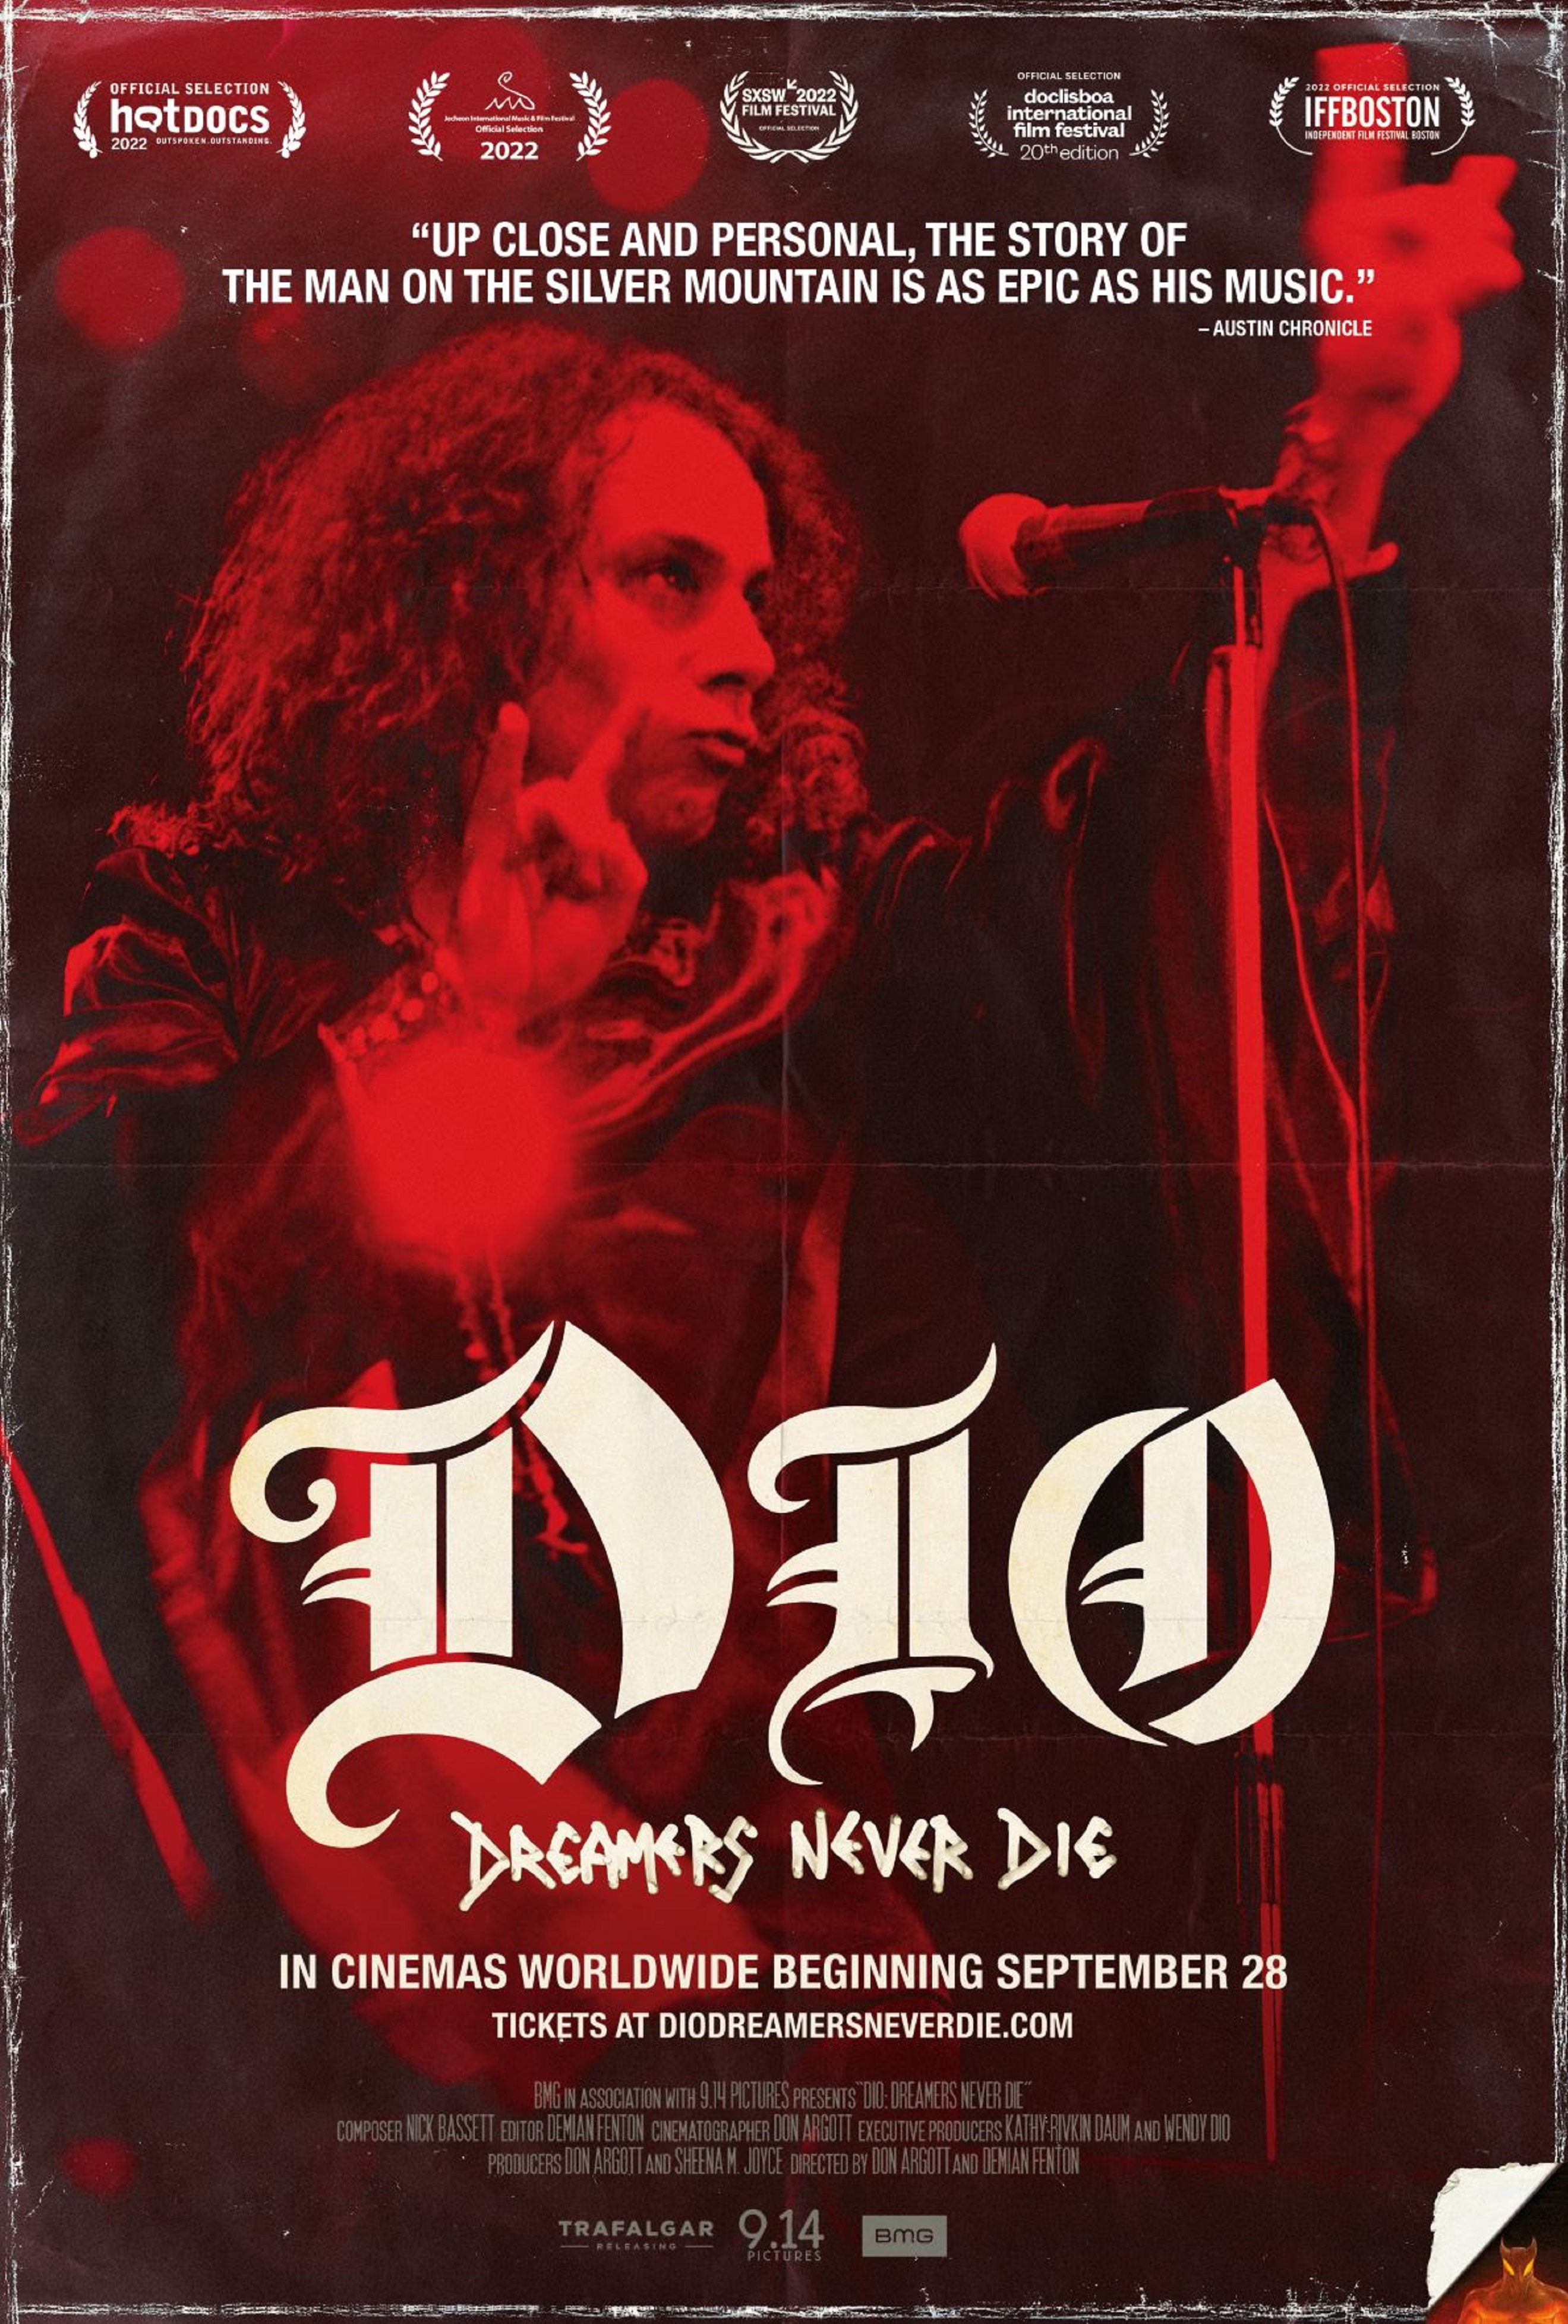 "DIO: DREAMERS NEVER DIE" Documentary Special Sept. 28 & Oct.2 Screenings Celebrating Metal Legend RONNIE JAMES DIO